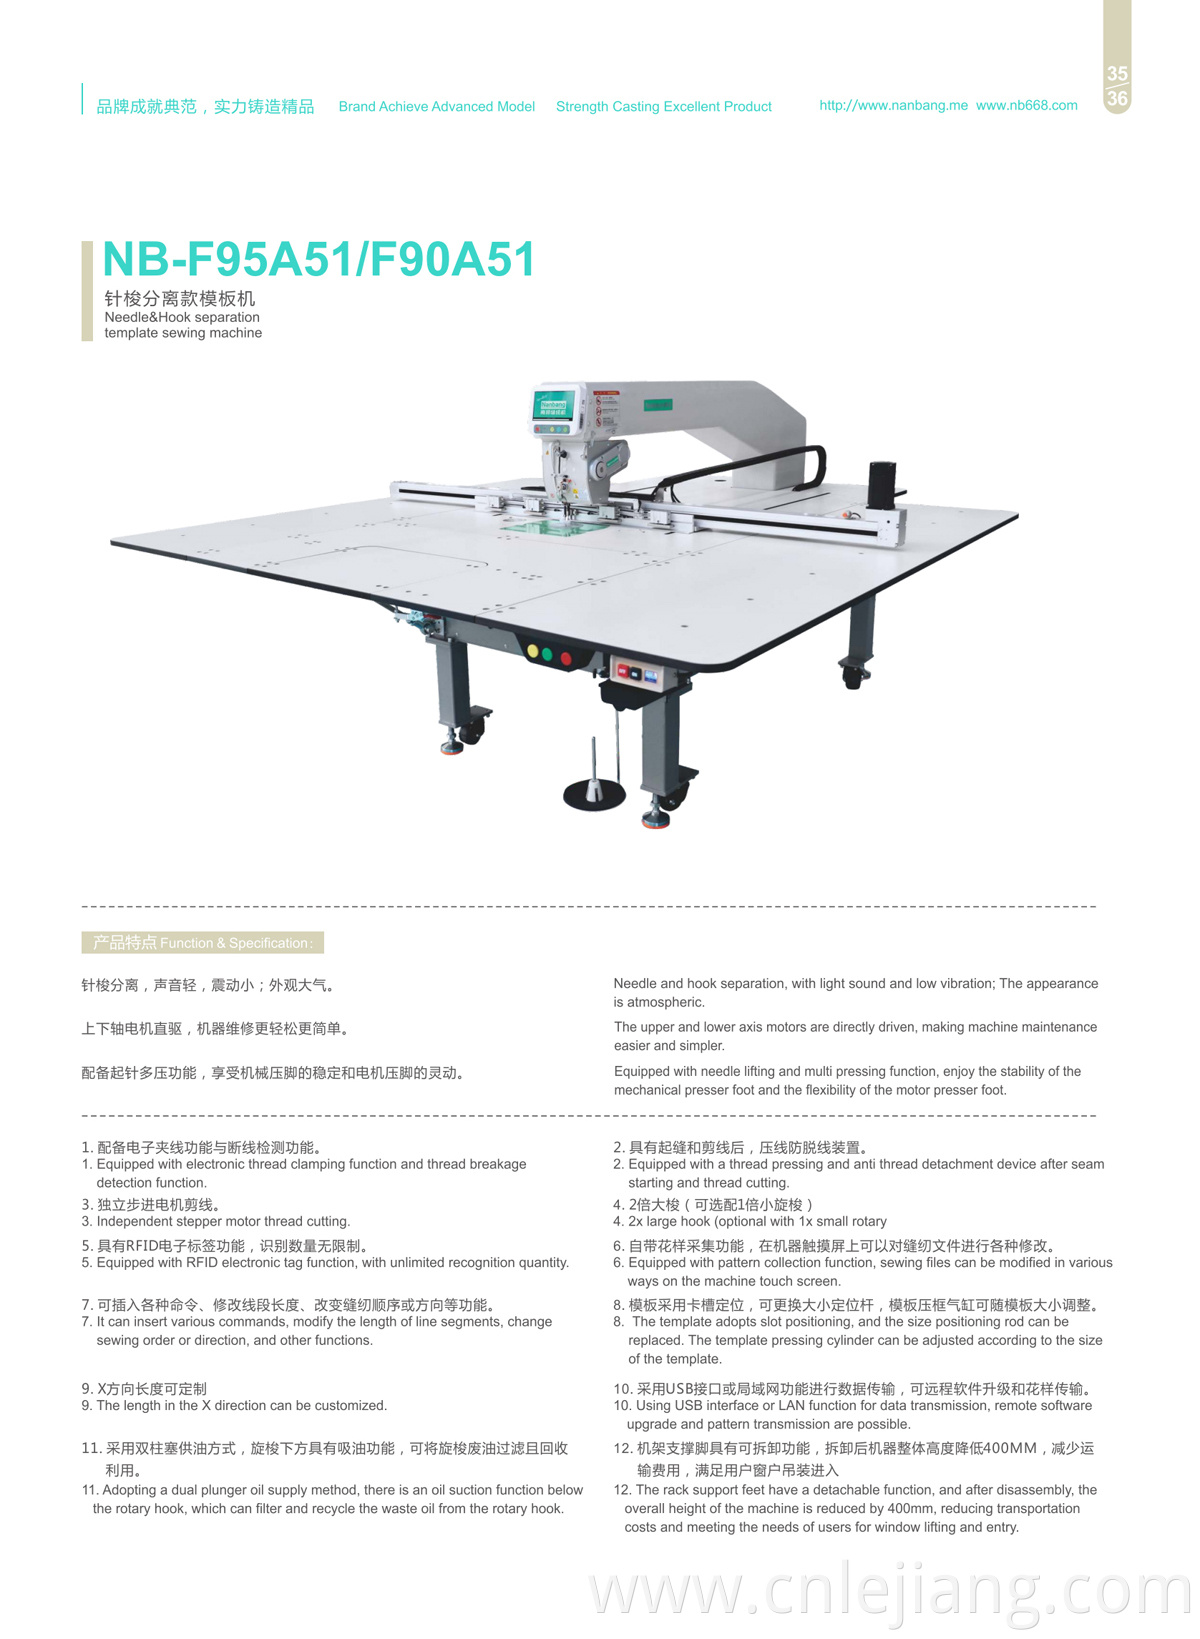 NB-F95A51orF90A51-view